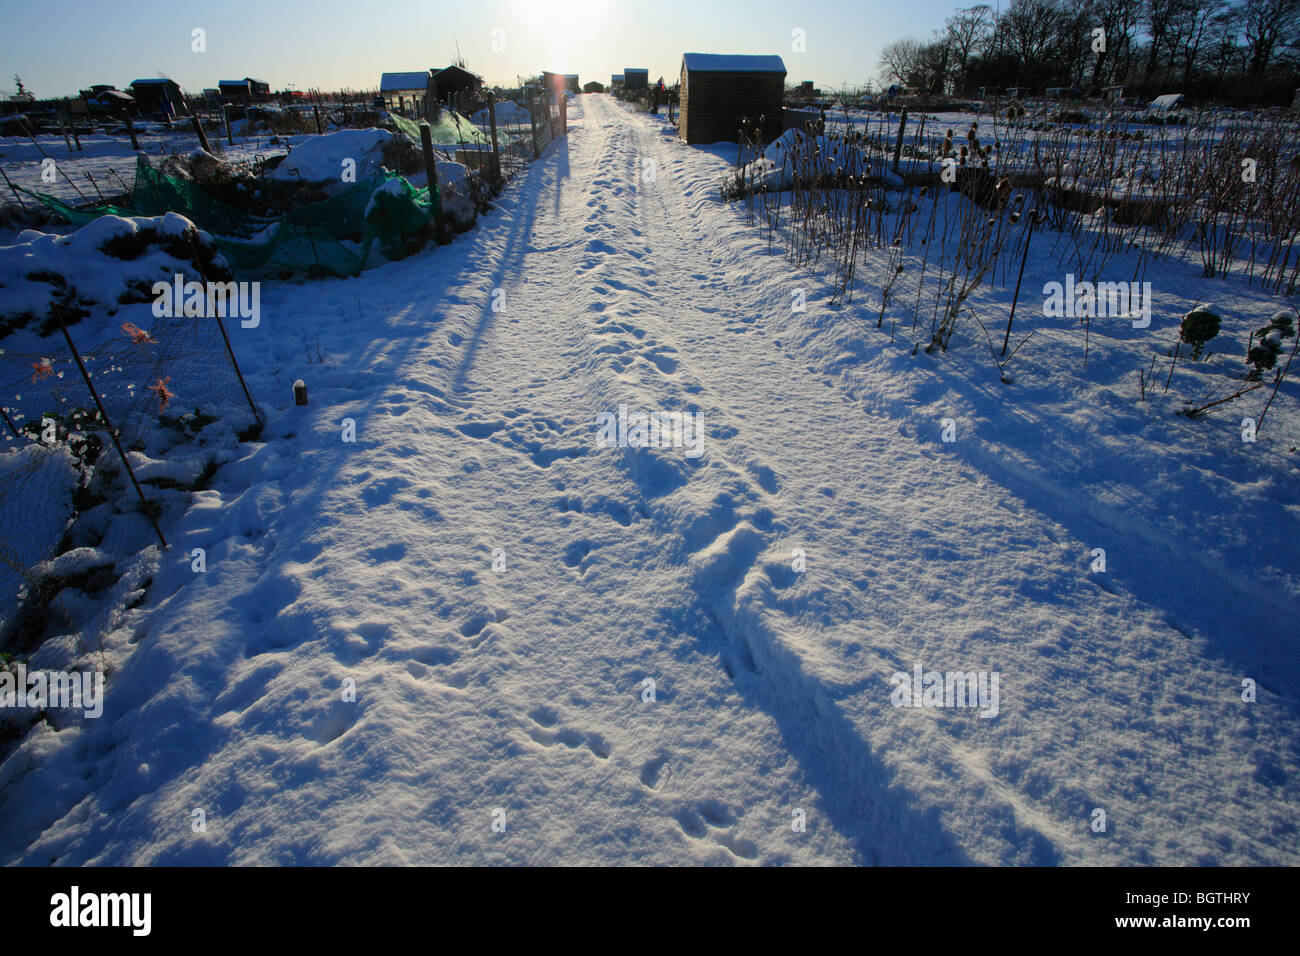 Allotments in winter covered with snow at Heacham, Norfolk. Stock Photo